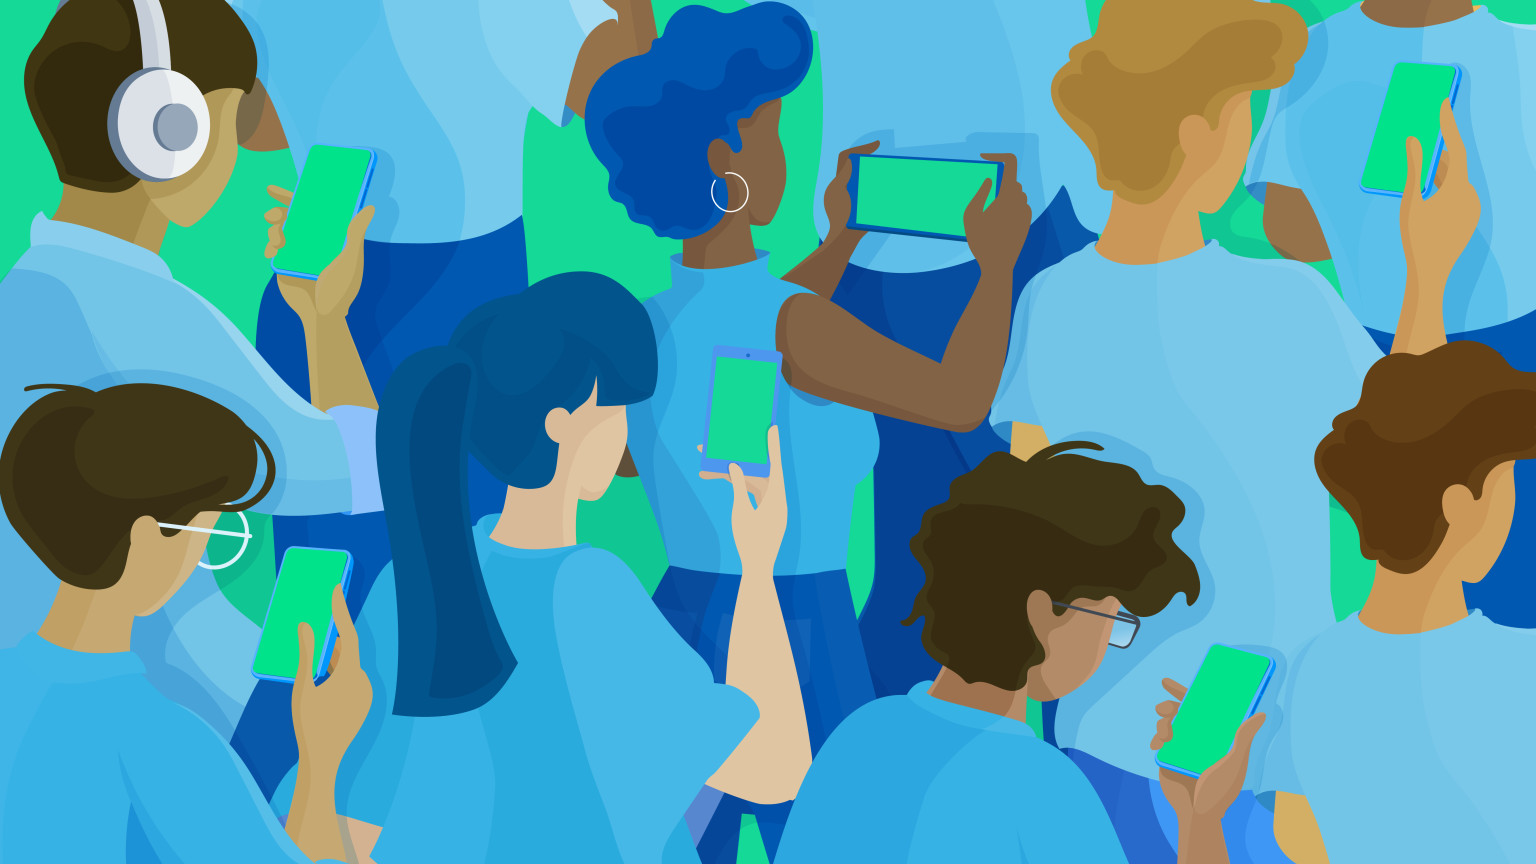 Illustration of a crowd of individuals looking at their device screens, the author is contemplating whether this is the future of technology